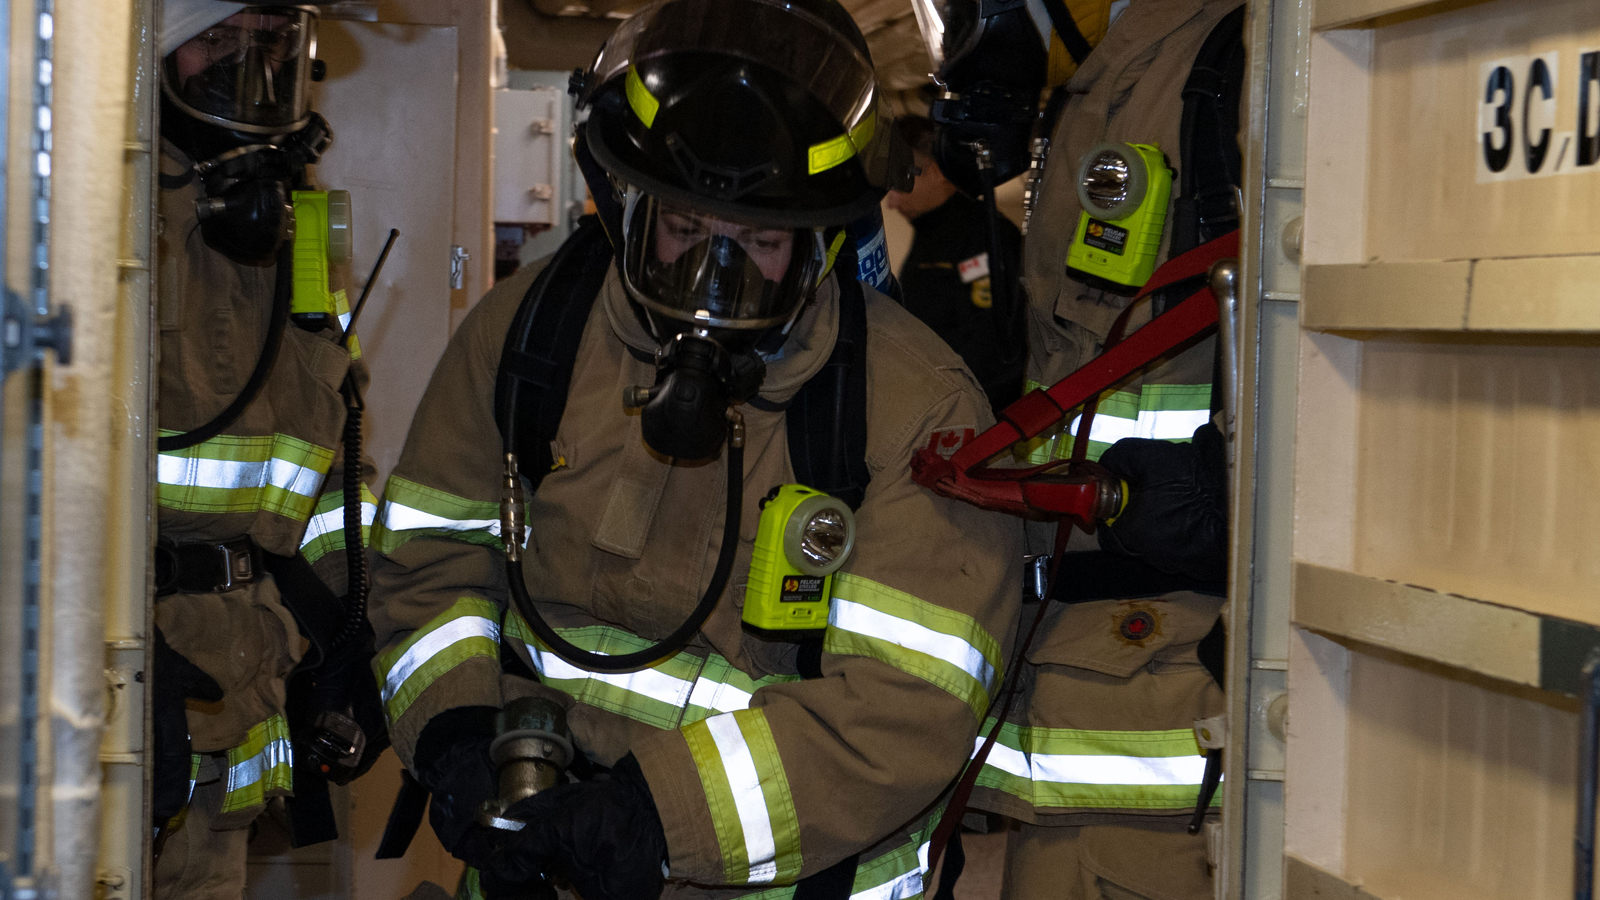 Sailor 2nd Class Alicia Campbell stands ready to fight a simulated fire